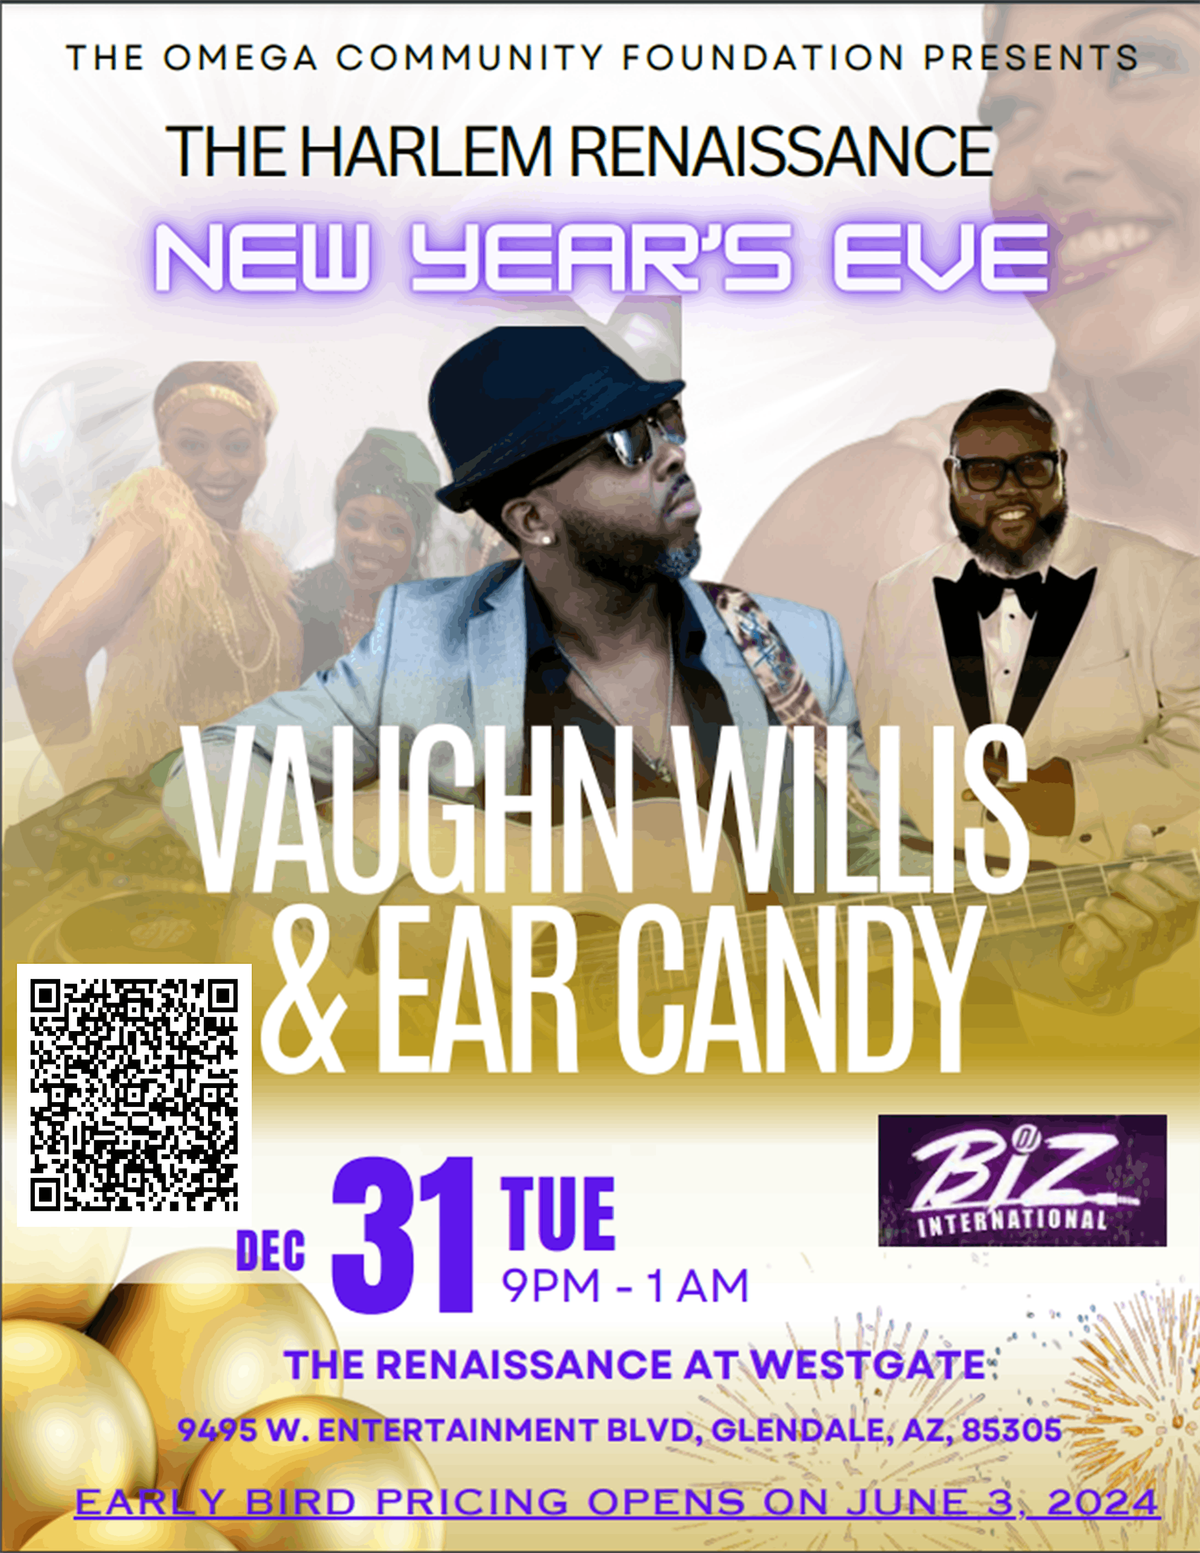 The Harlem Renaissance, a New Year's Eve with Vaughn Willis and Ear Candy